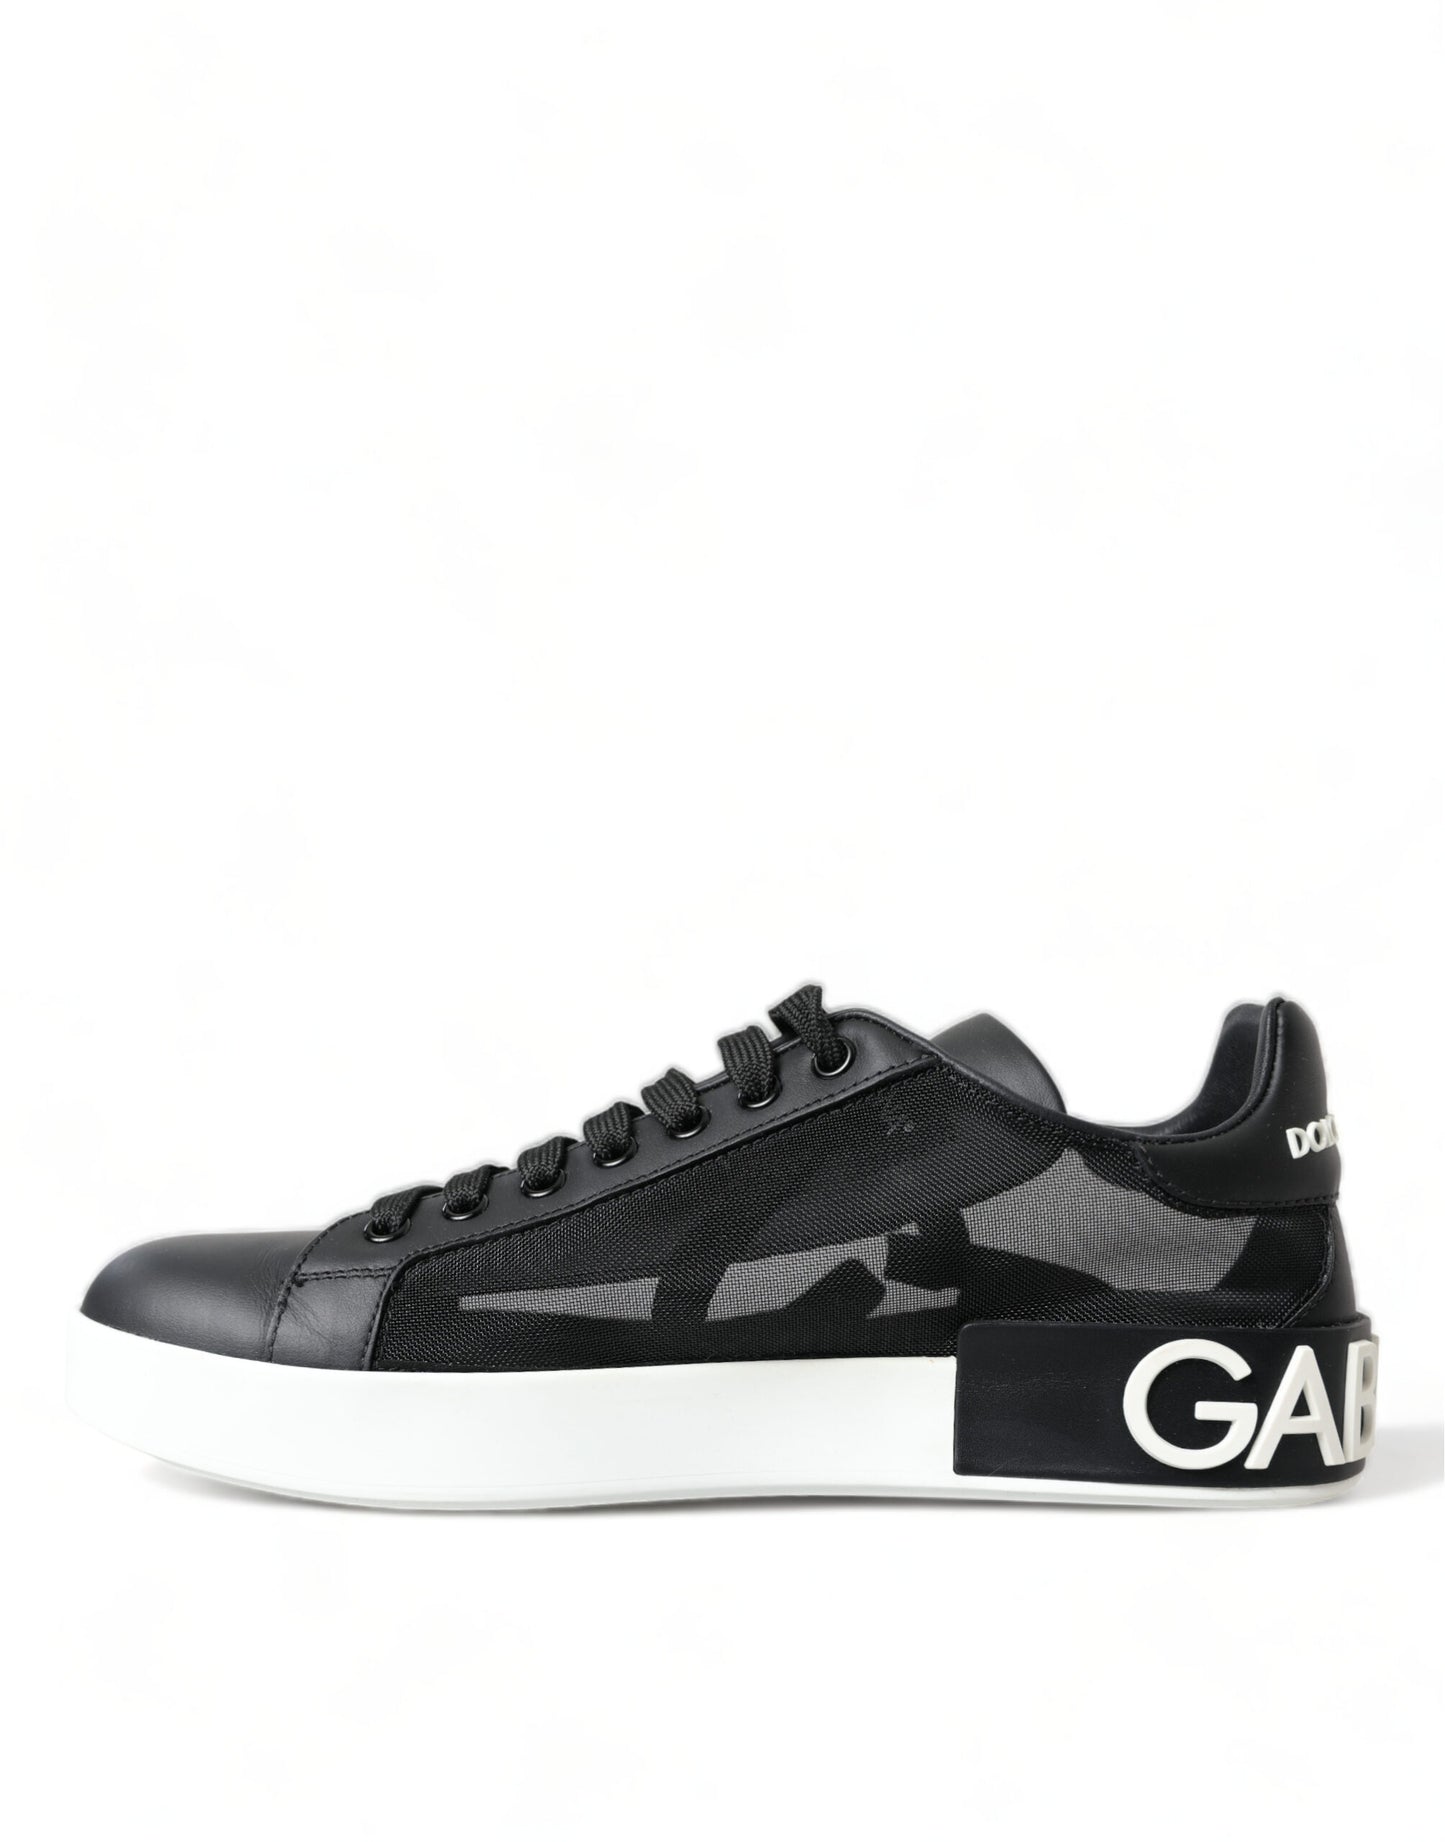 Dolce & Gabbana Elegant Black and White Low-Top Sneakers